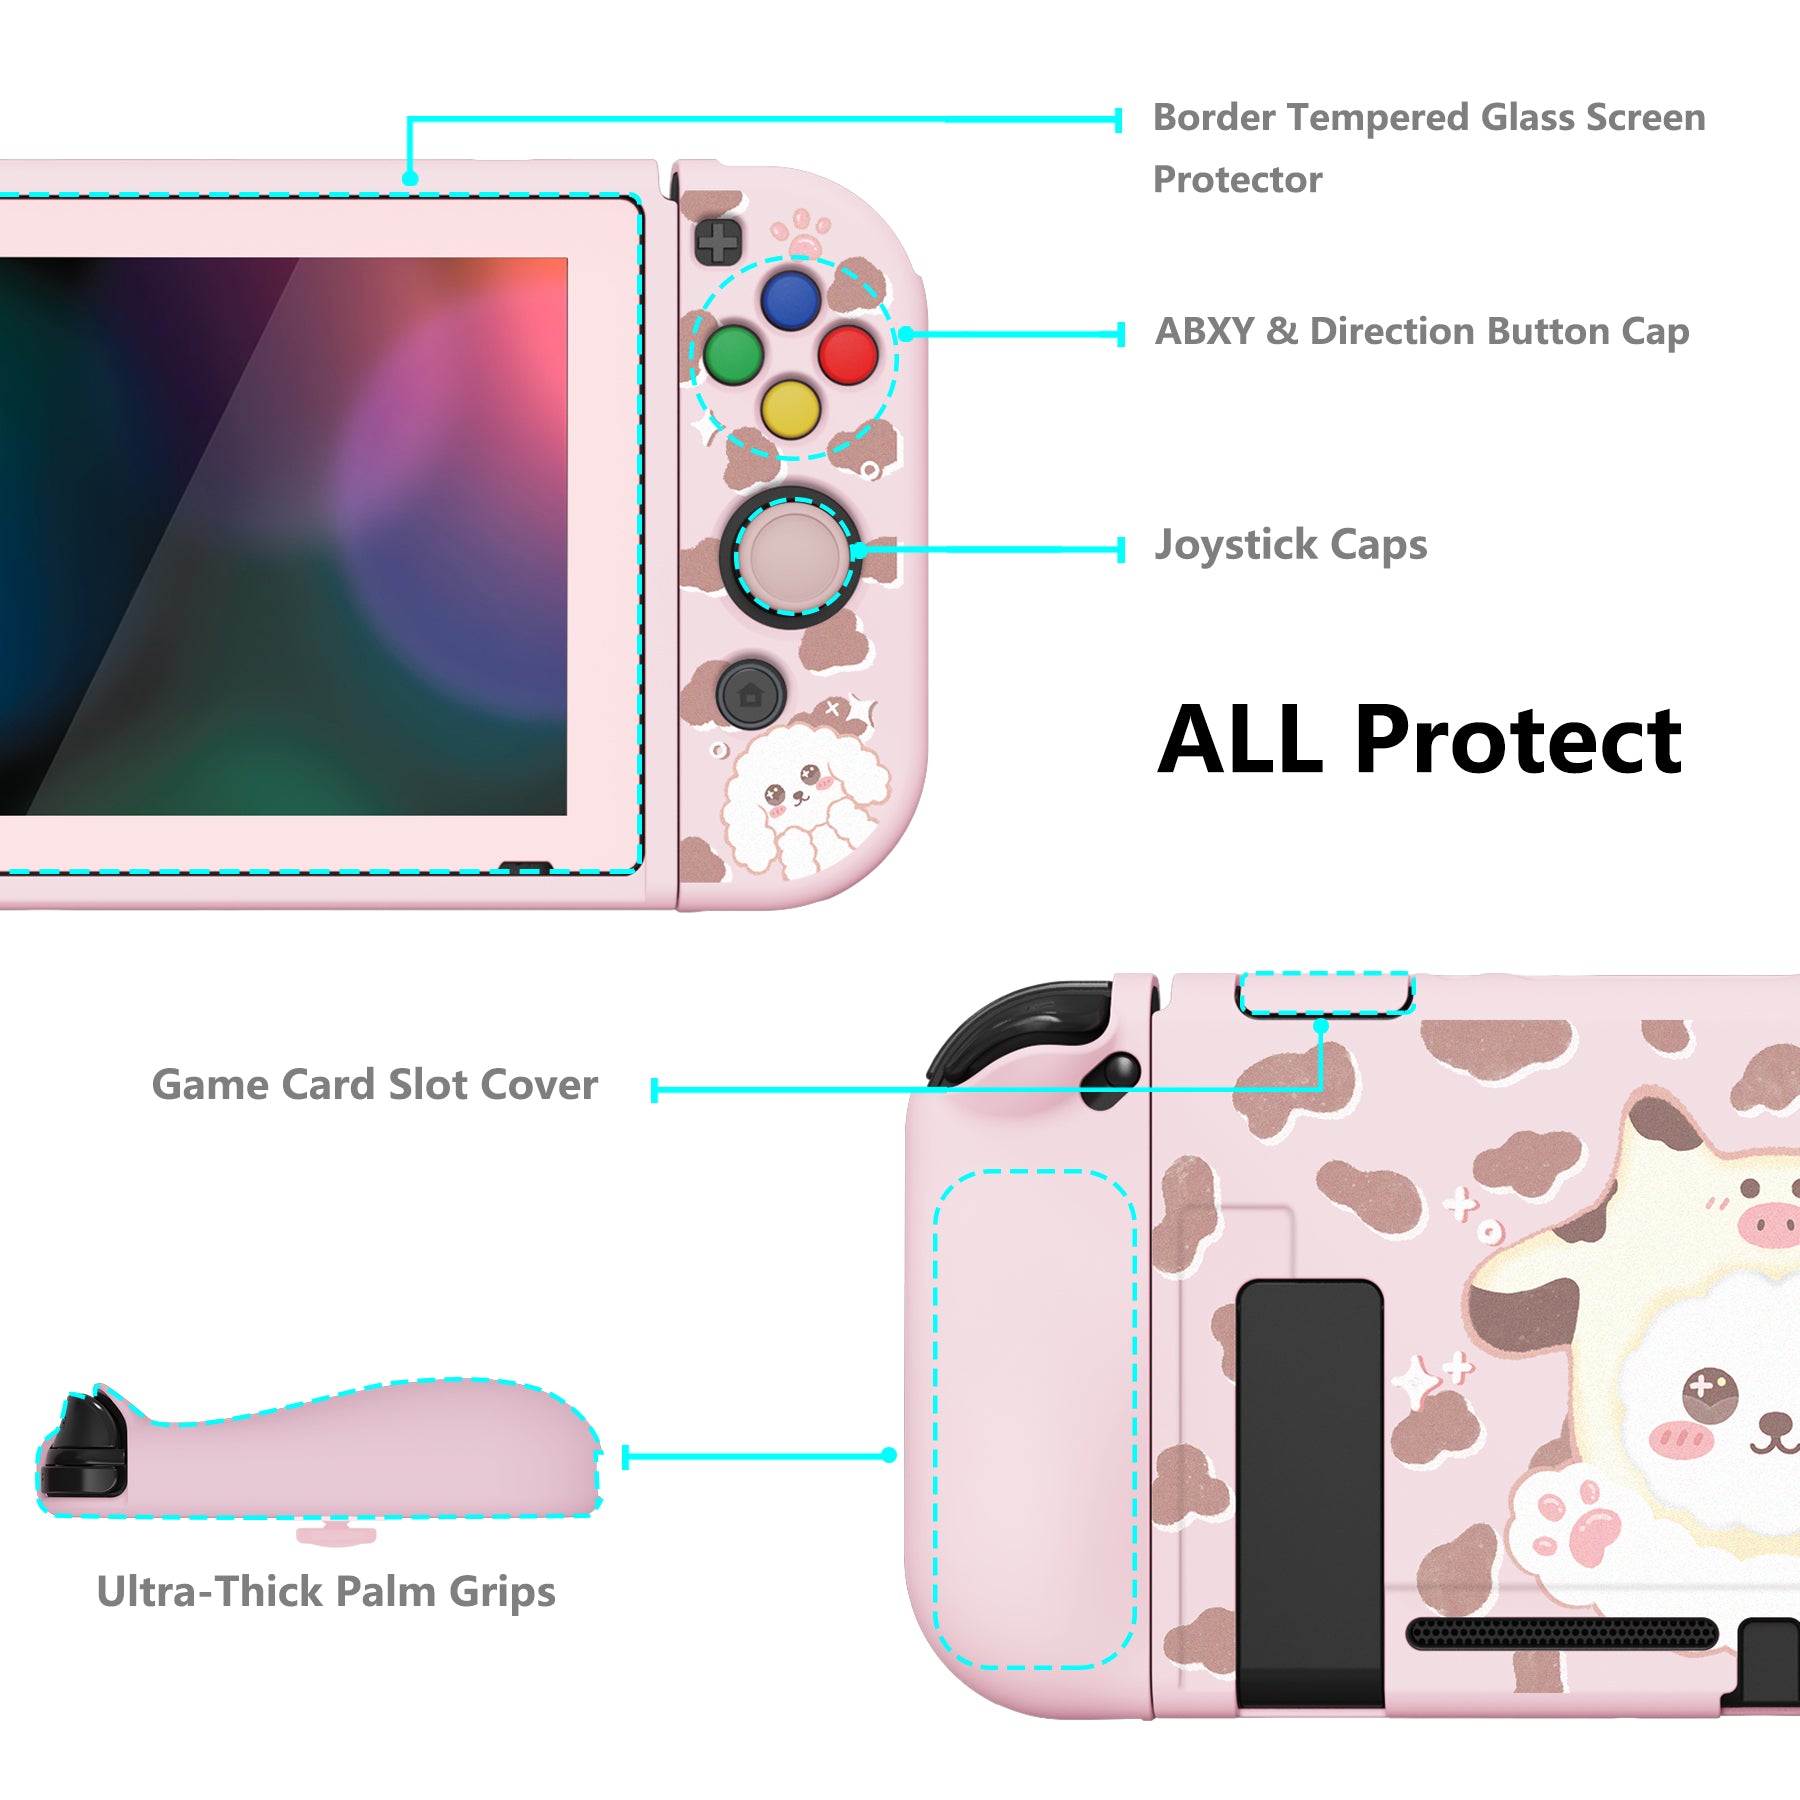 PlayVital ZealProtect Soft Protective Case for Nintendo Switch, Flexible Cover for Switch with Tempered Glass Screen Protector & Thumb Grips & ABXY Direction Button Caps - Cosplay Puppy - RNSYV6029 playvital